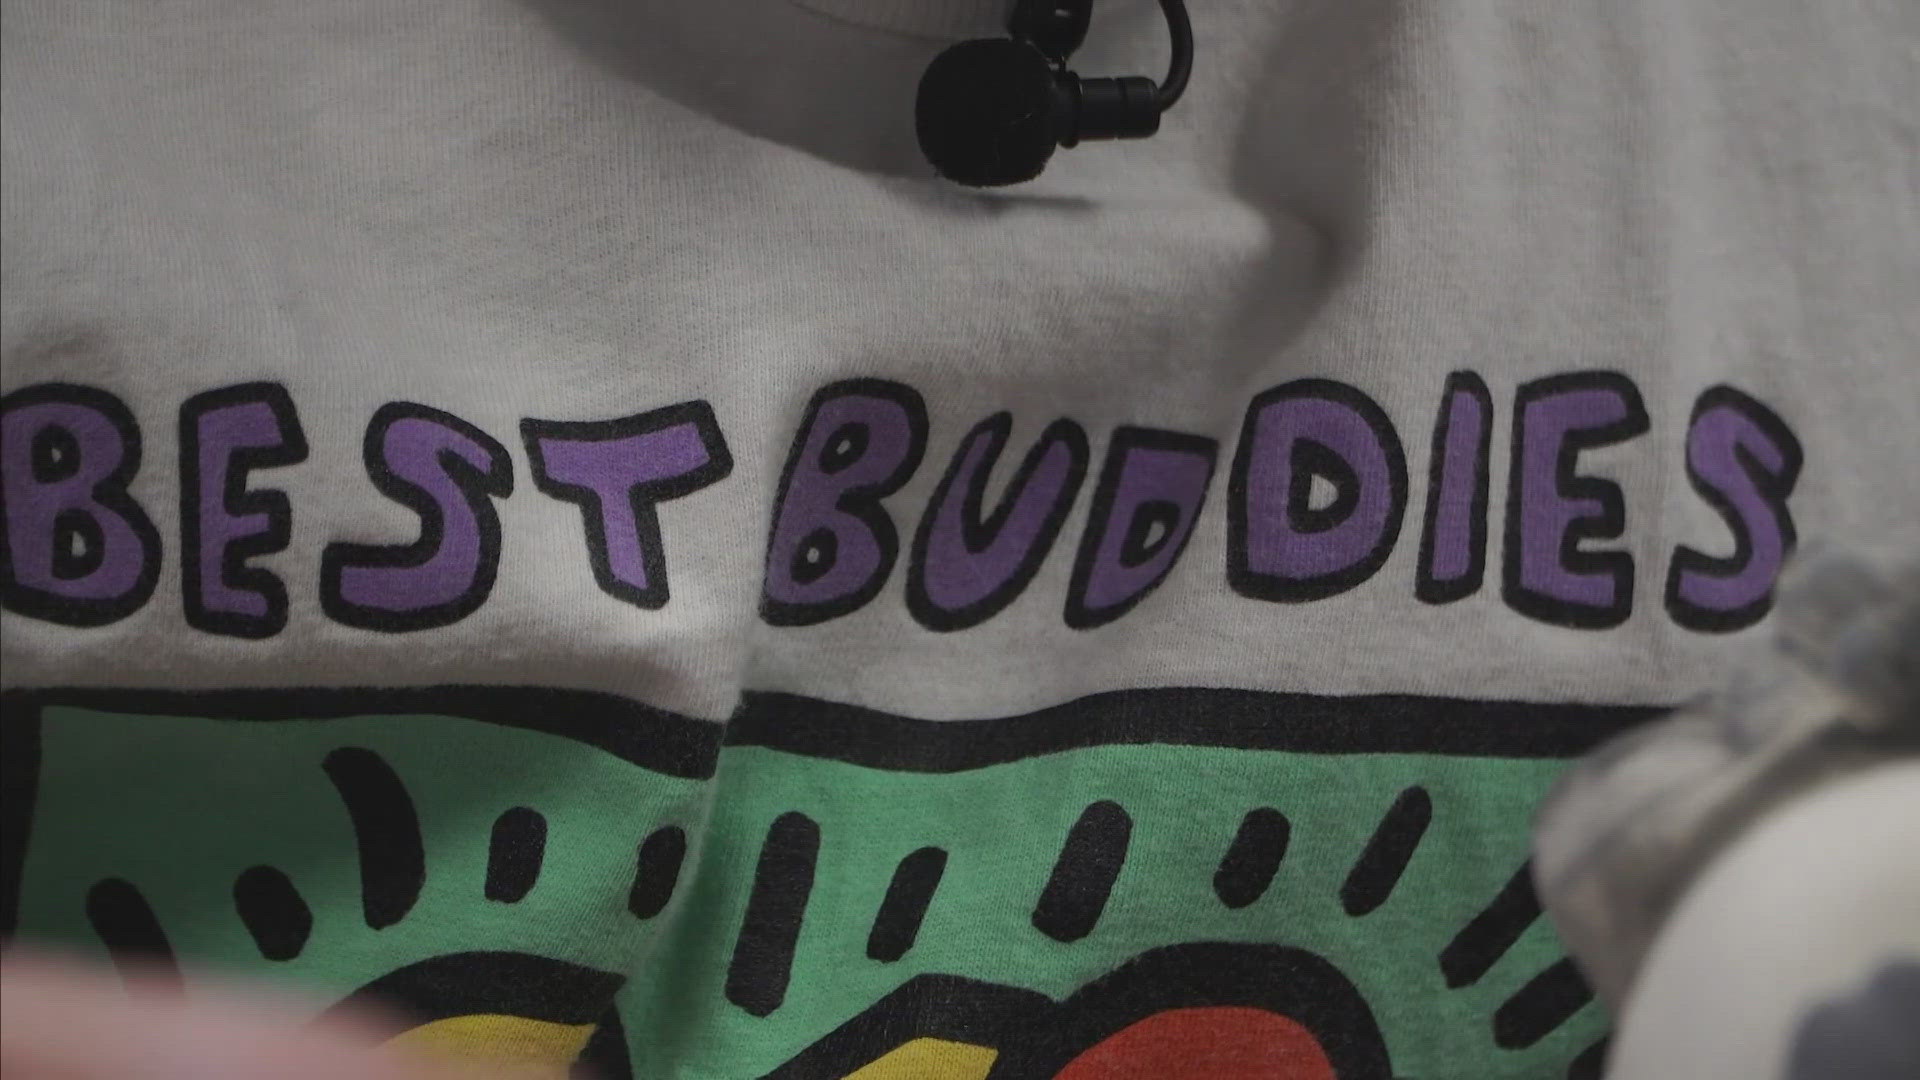 A local non-profit called Best Buddies of Virginia and DC is helping to foster friendships between people with and without disabilities to help promote inclusivity.